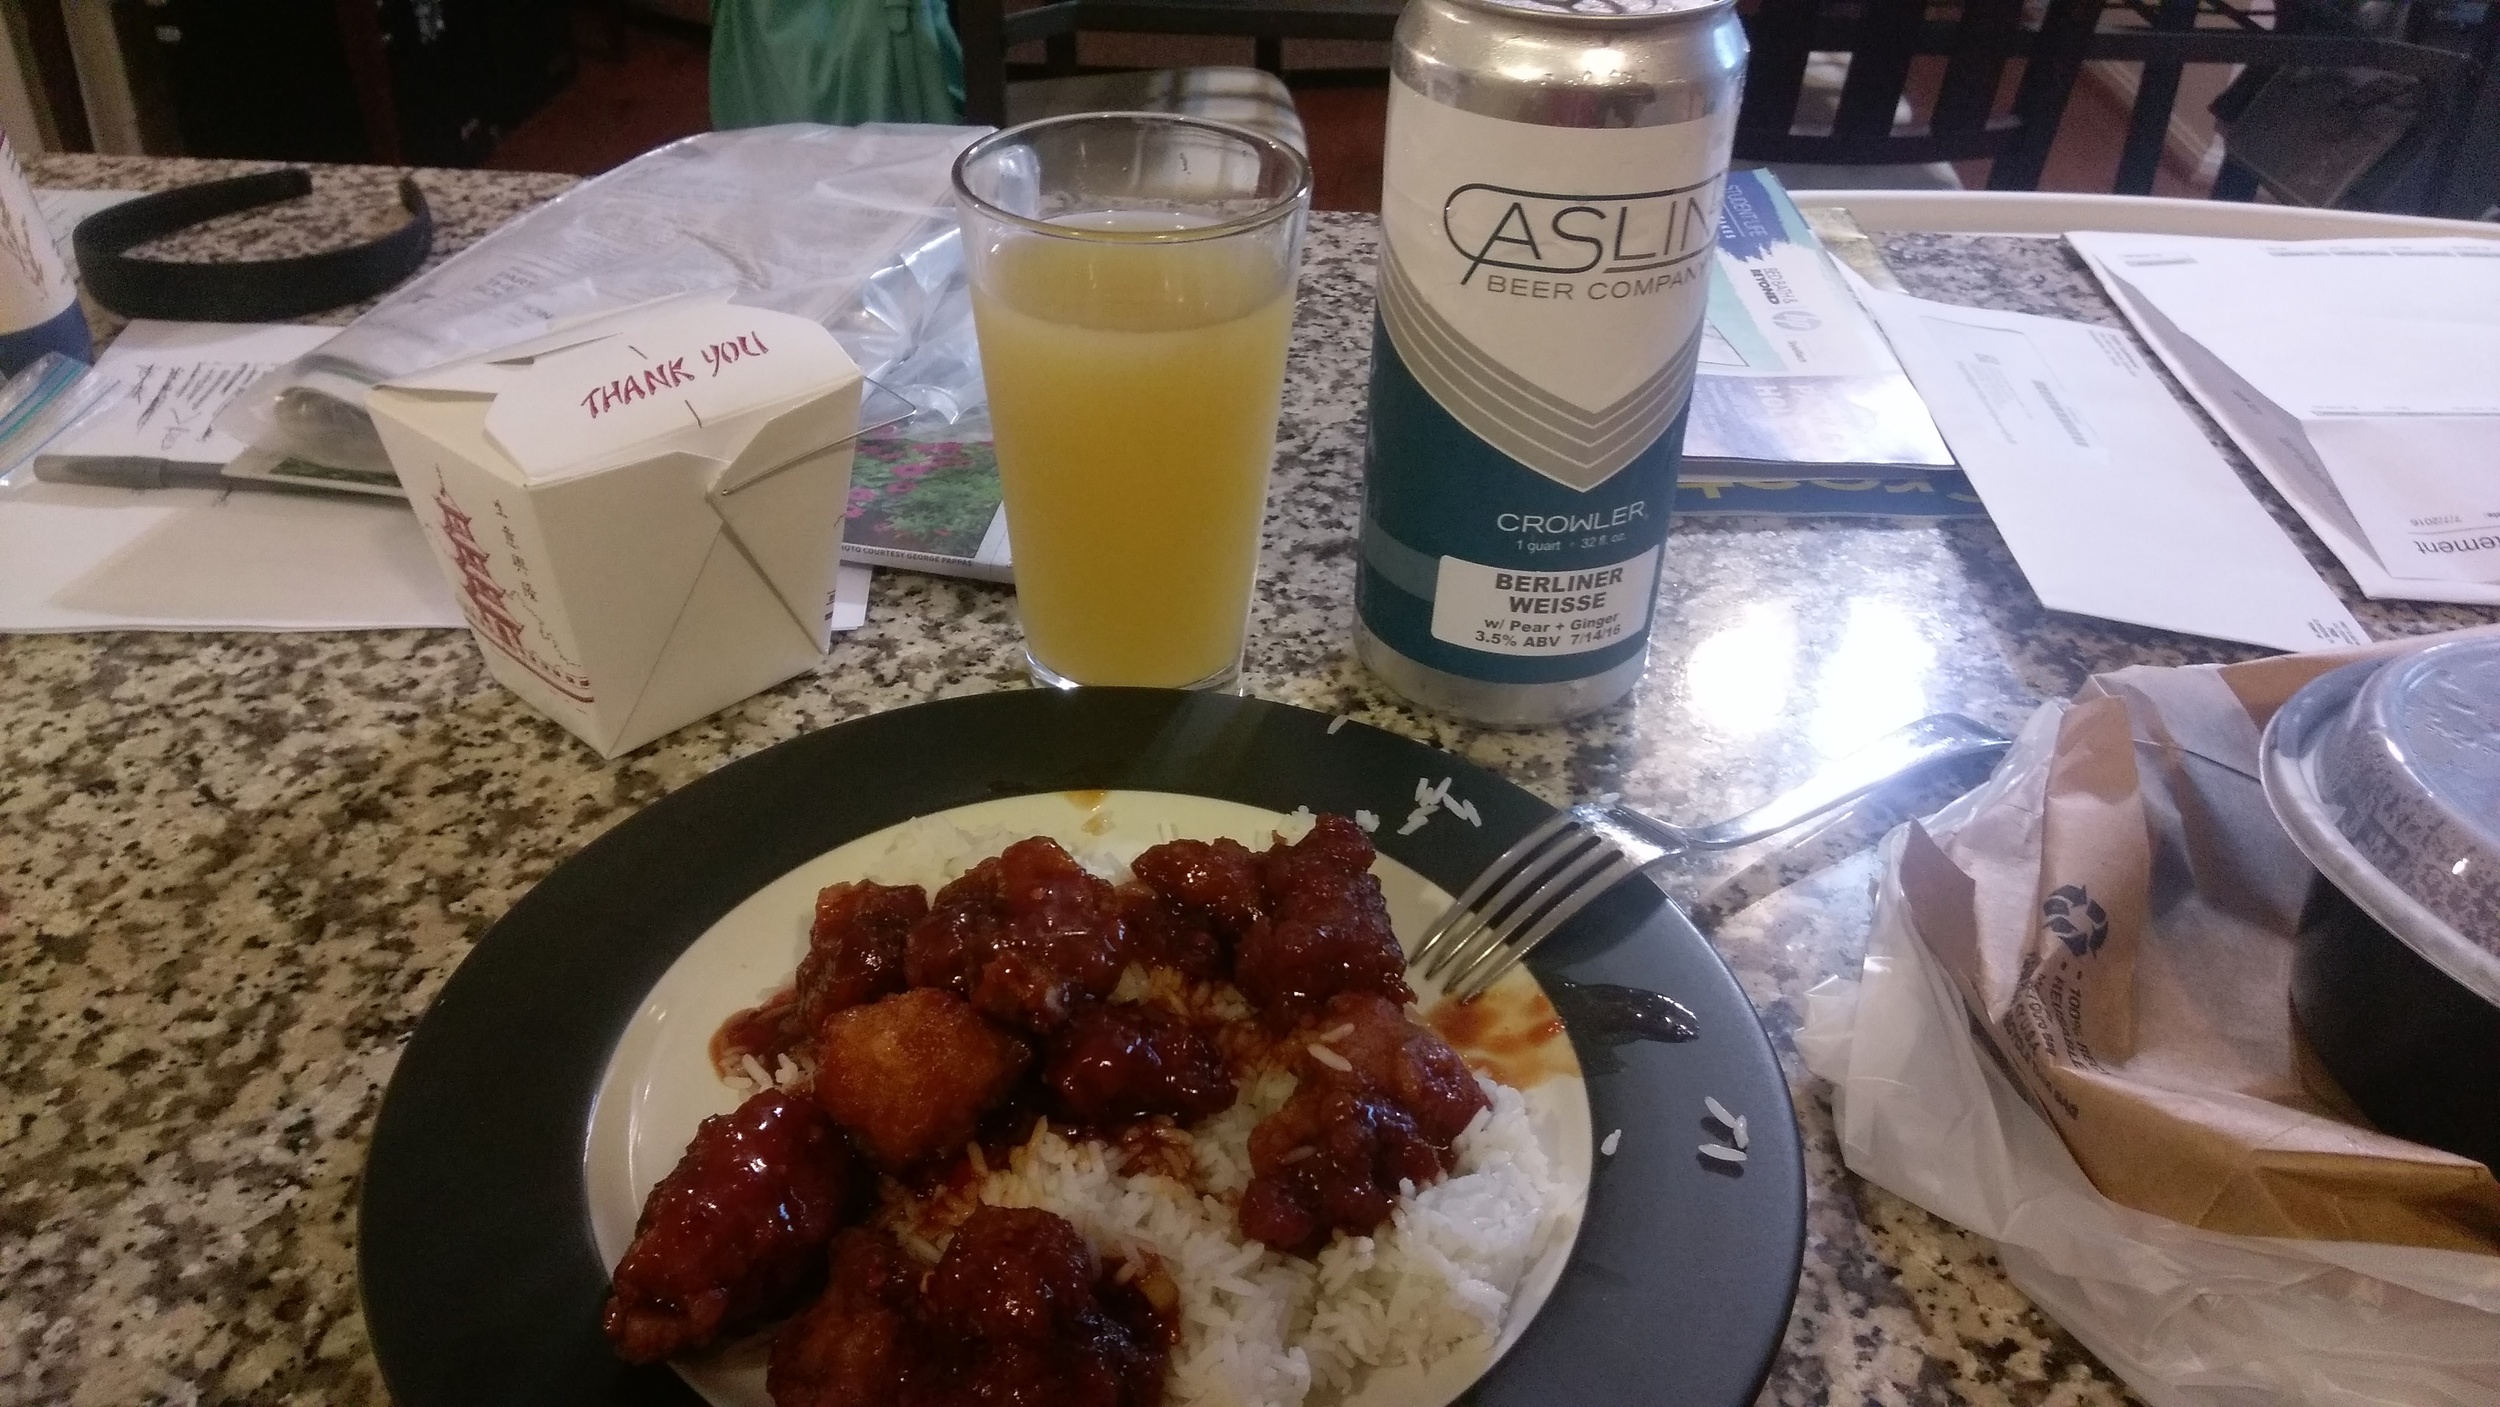 Chinese and Beer. Delicious.